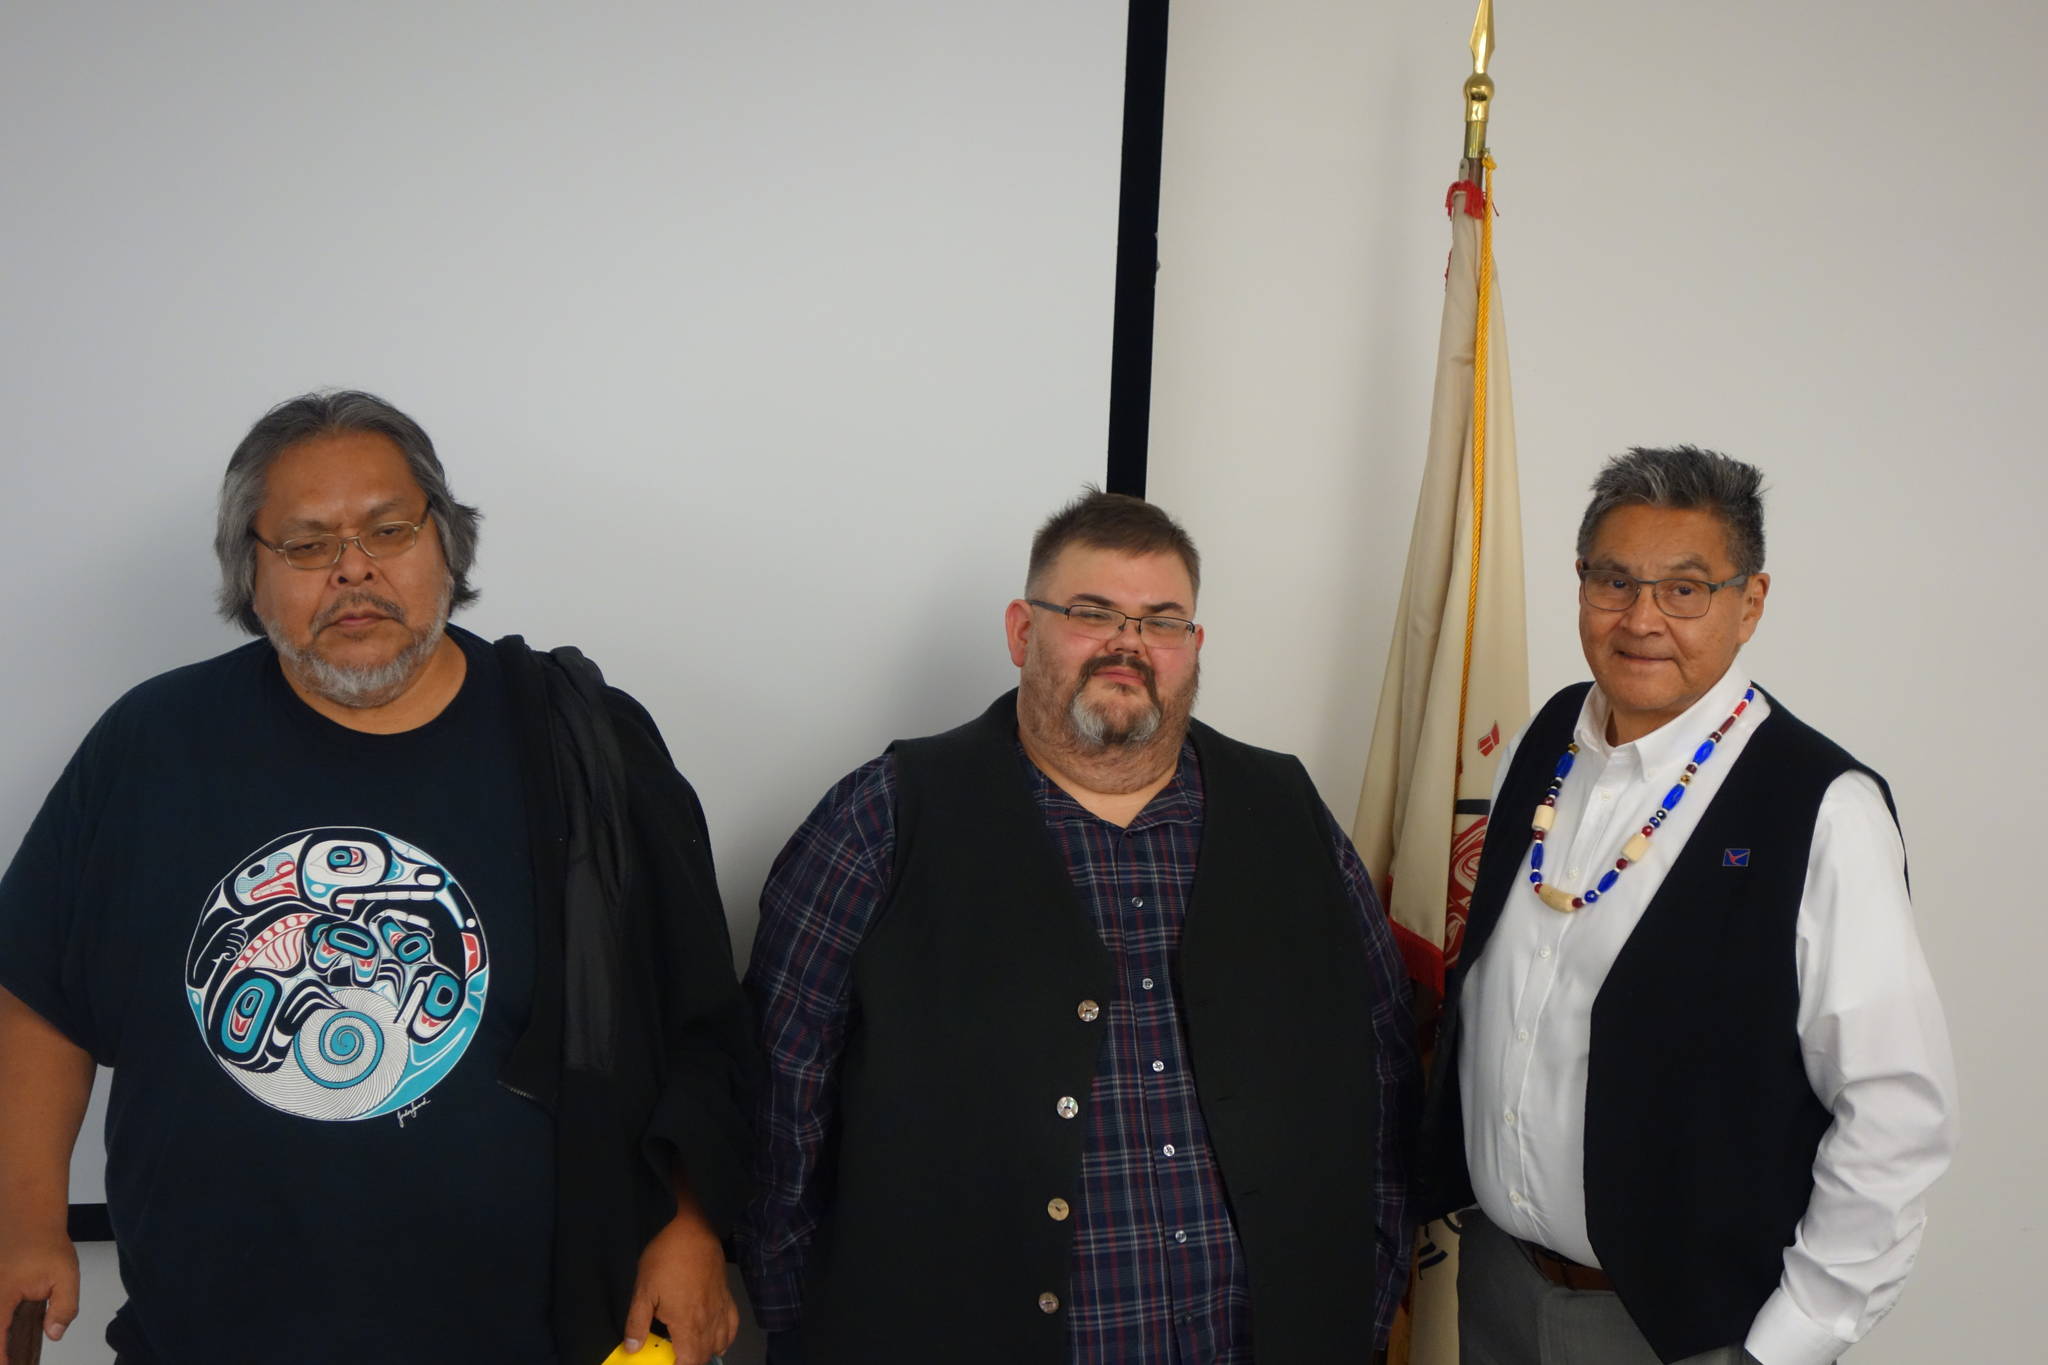 Ben Hohenstatt / Juneau Empire File                                 Organized Village of Kake President Joel Jackson, Central Council of Tlingit and Haida Indian Tribes of Alaska President Richard Chalyee Éesh Peterson and Organized Village of Saxman President Lee Wallace stand together following a meeting with United States Department of Agriculture Under Secretary Jim Hubbard in Juneau Saturday, Nov. 2, 2019. Tlingit and Haida, Kake and Saxman are among a network responding to the coronavirus.